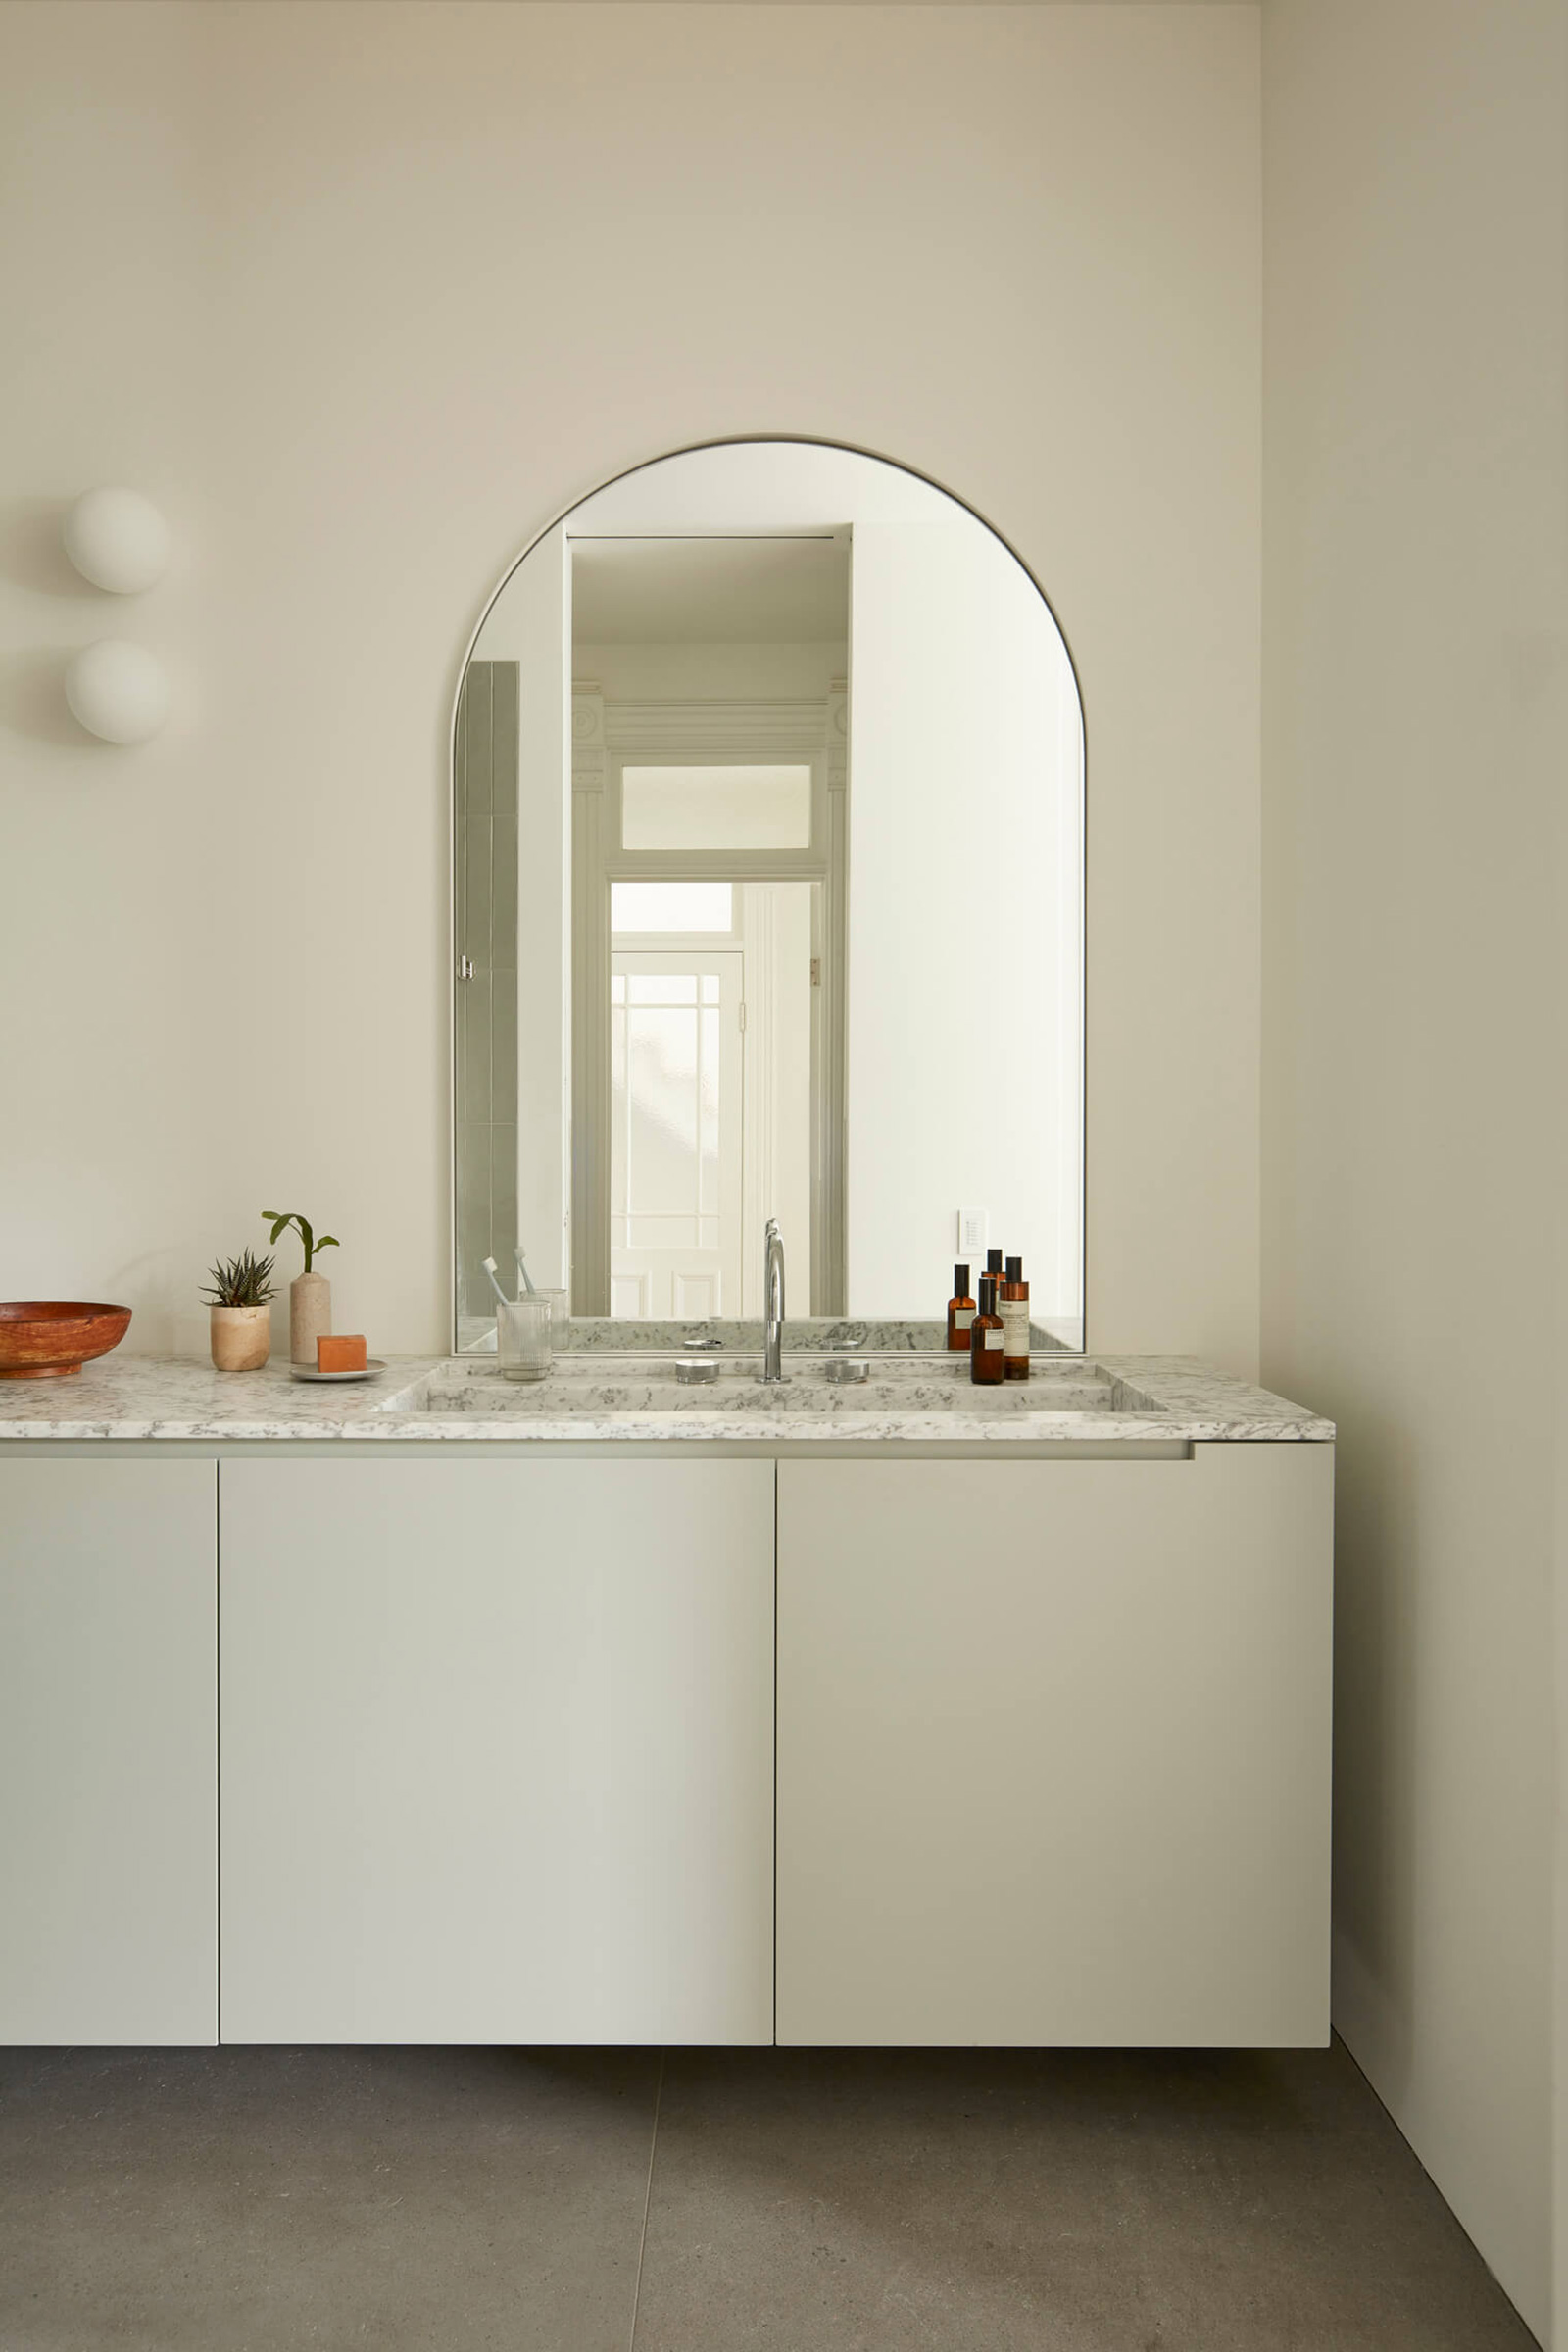 Les Tissages La Shed Architecture, modern bathroom with curved mirror